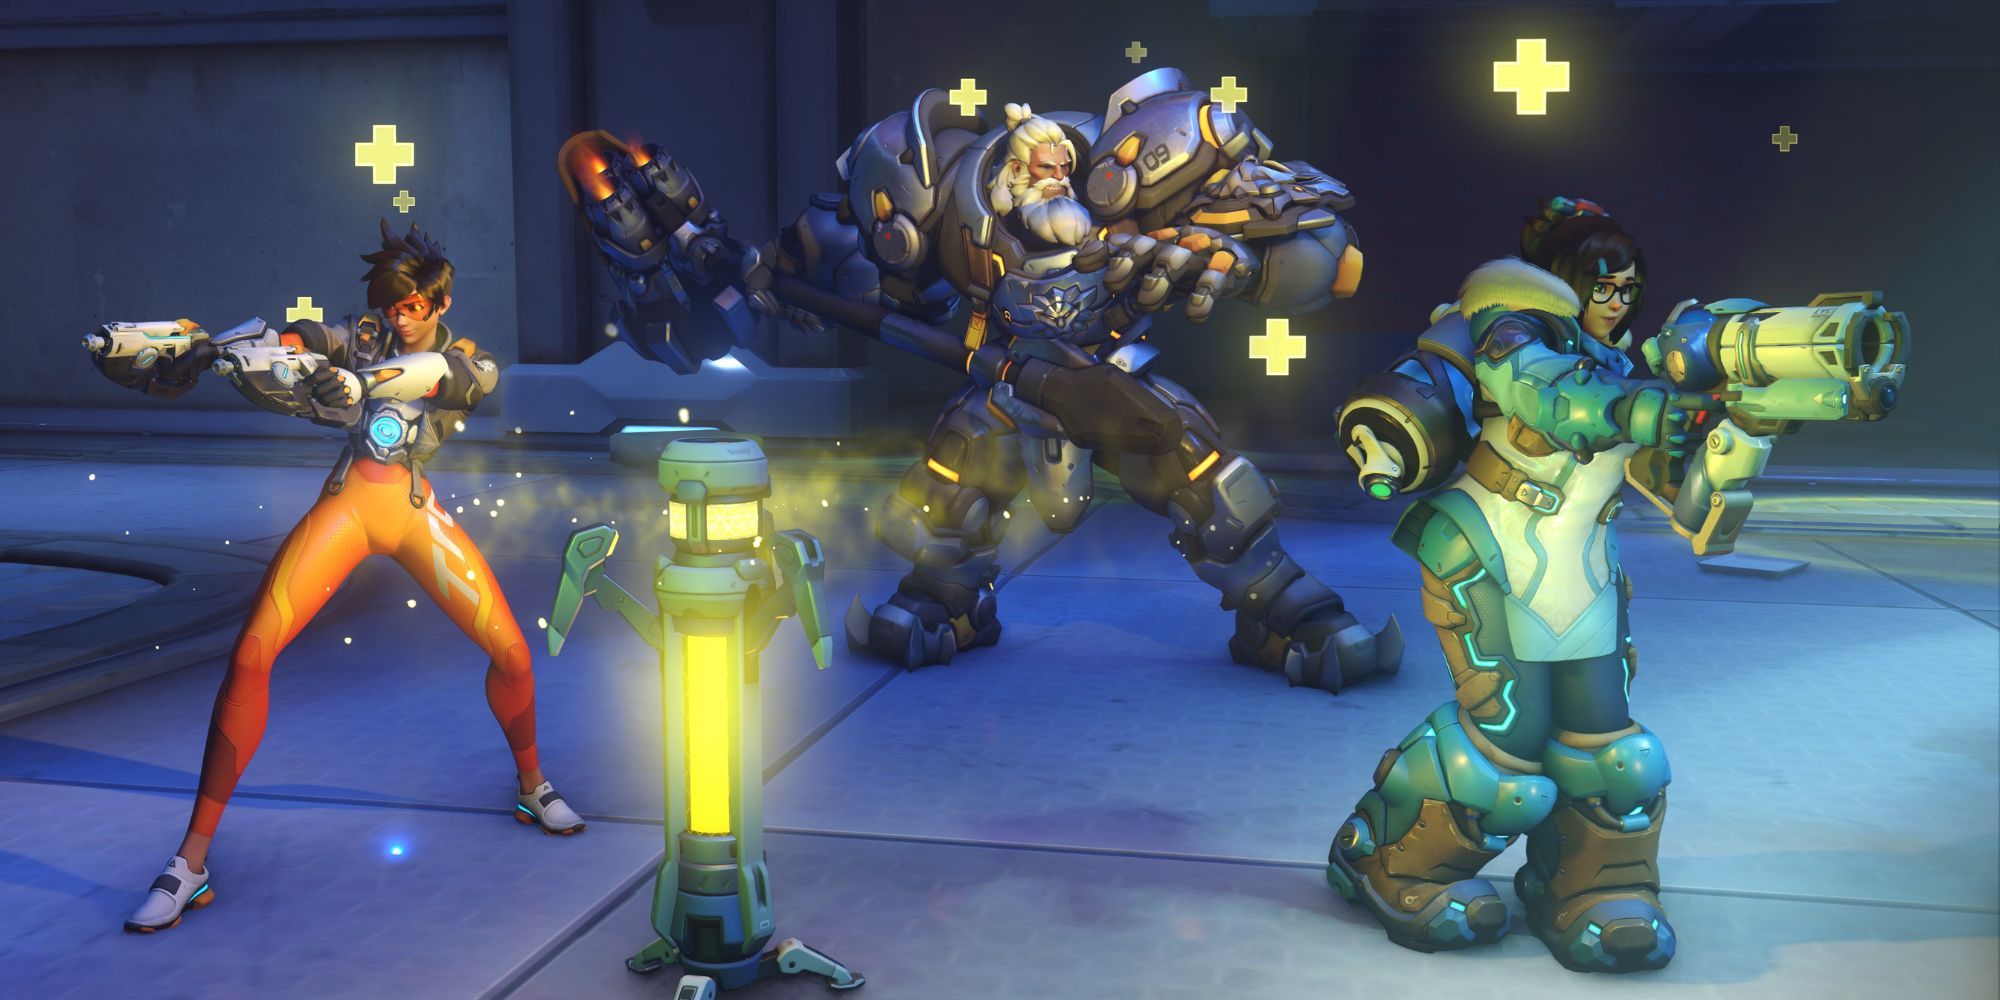 Overwatch 2's Tracer, Reinhardt, and Mei aiming their weapons while healing up